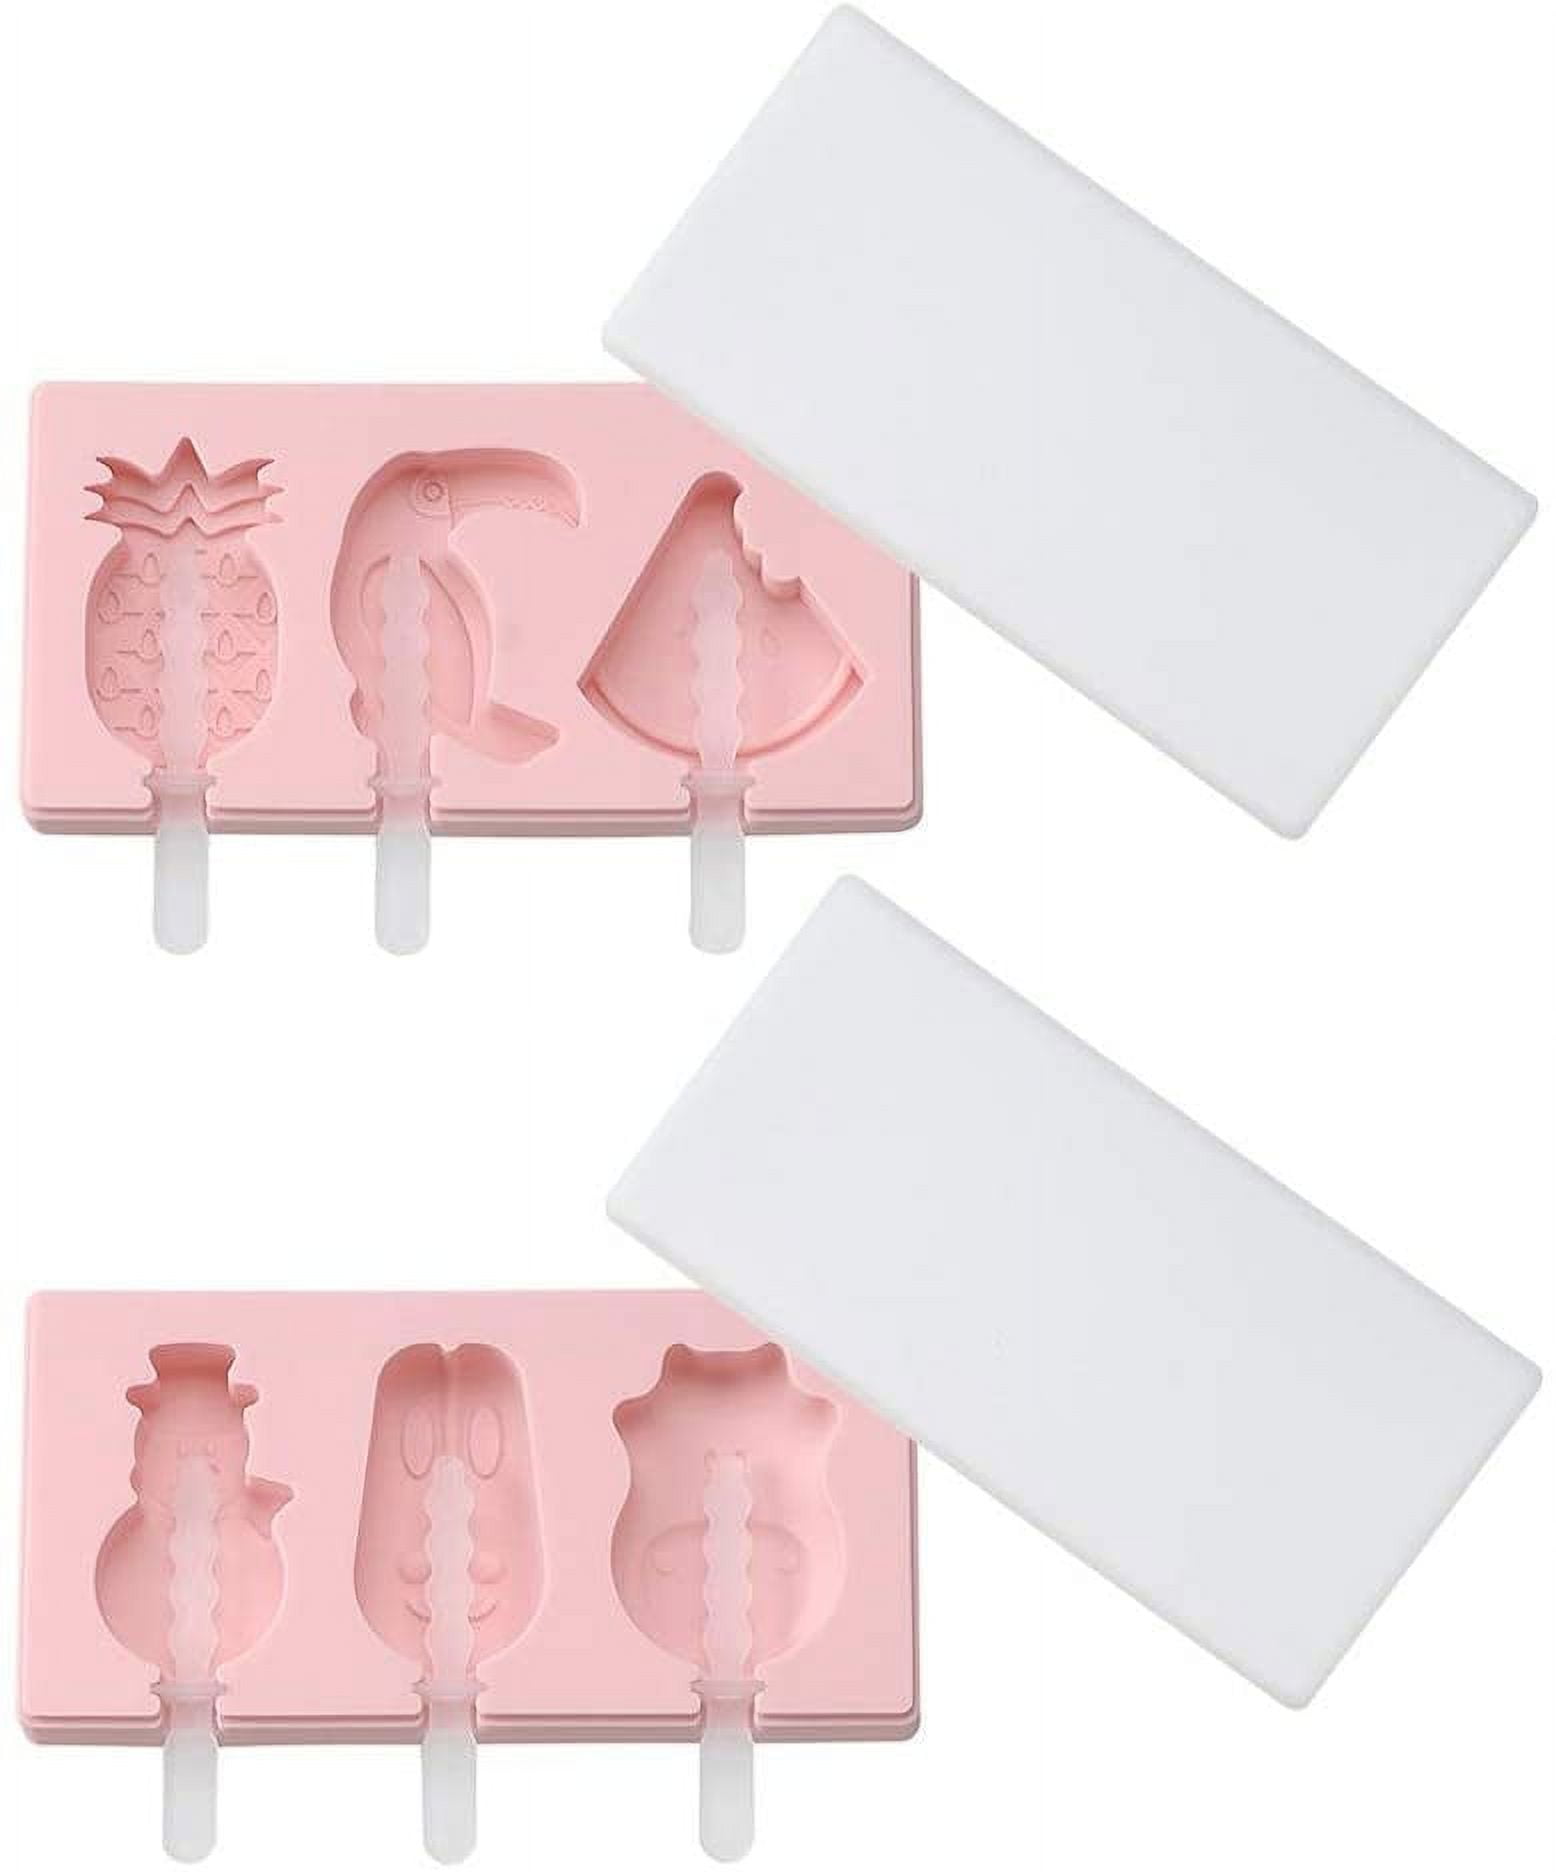 Cute Popsicle Molds Silicone Ice Pop Molds Homemade Popsicle Silicone Mold  with 100pcs Popsicle Sticks Reusable Easy Release Ice Pop Maker (Pineapple)